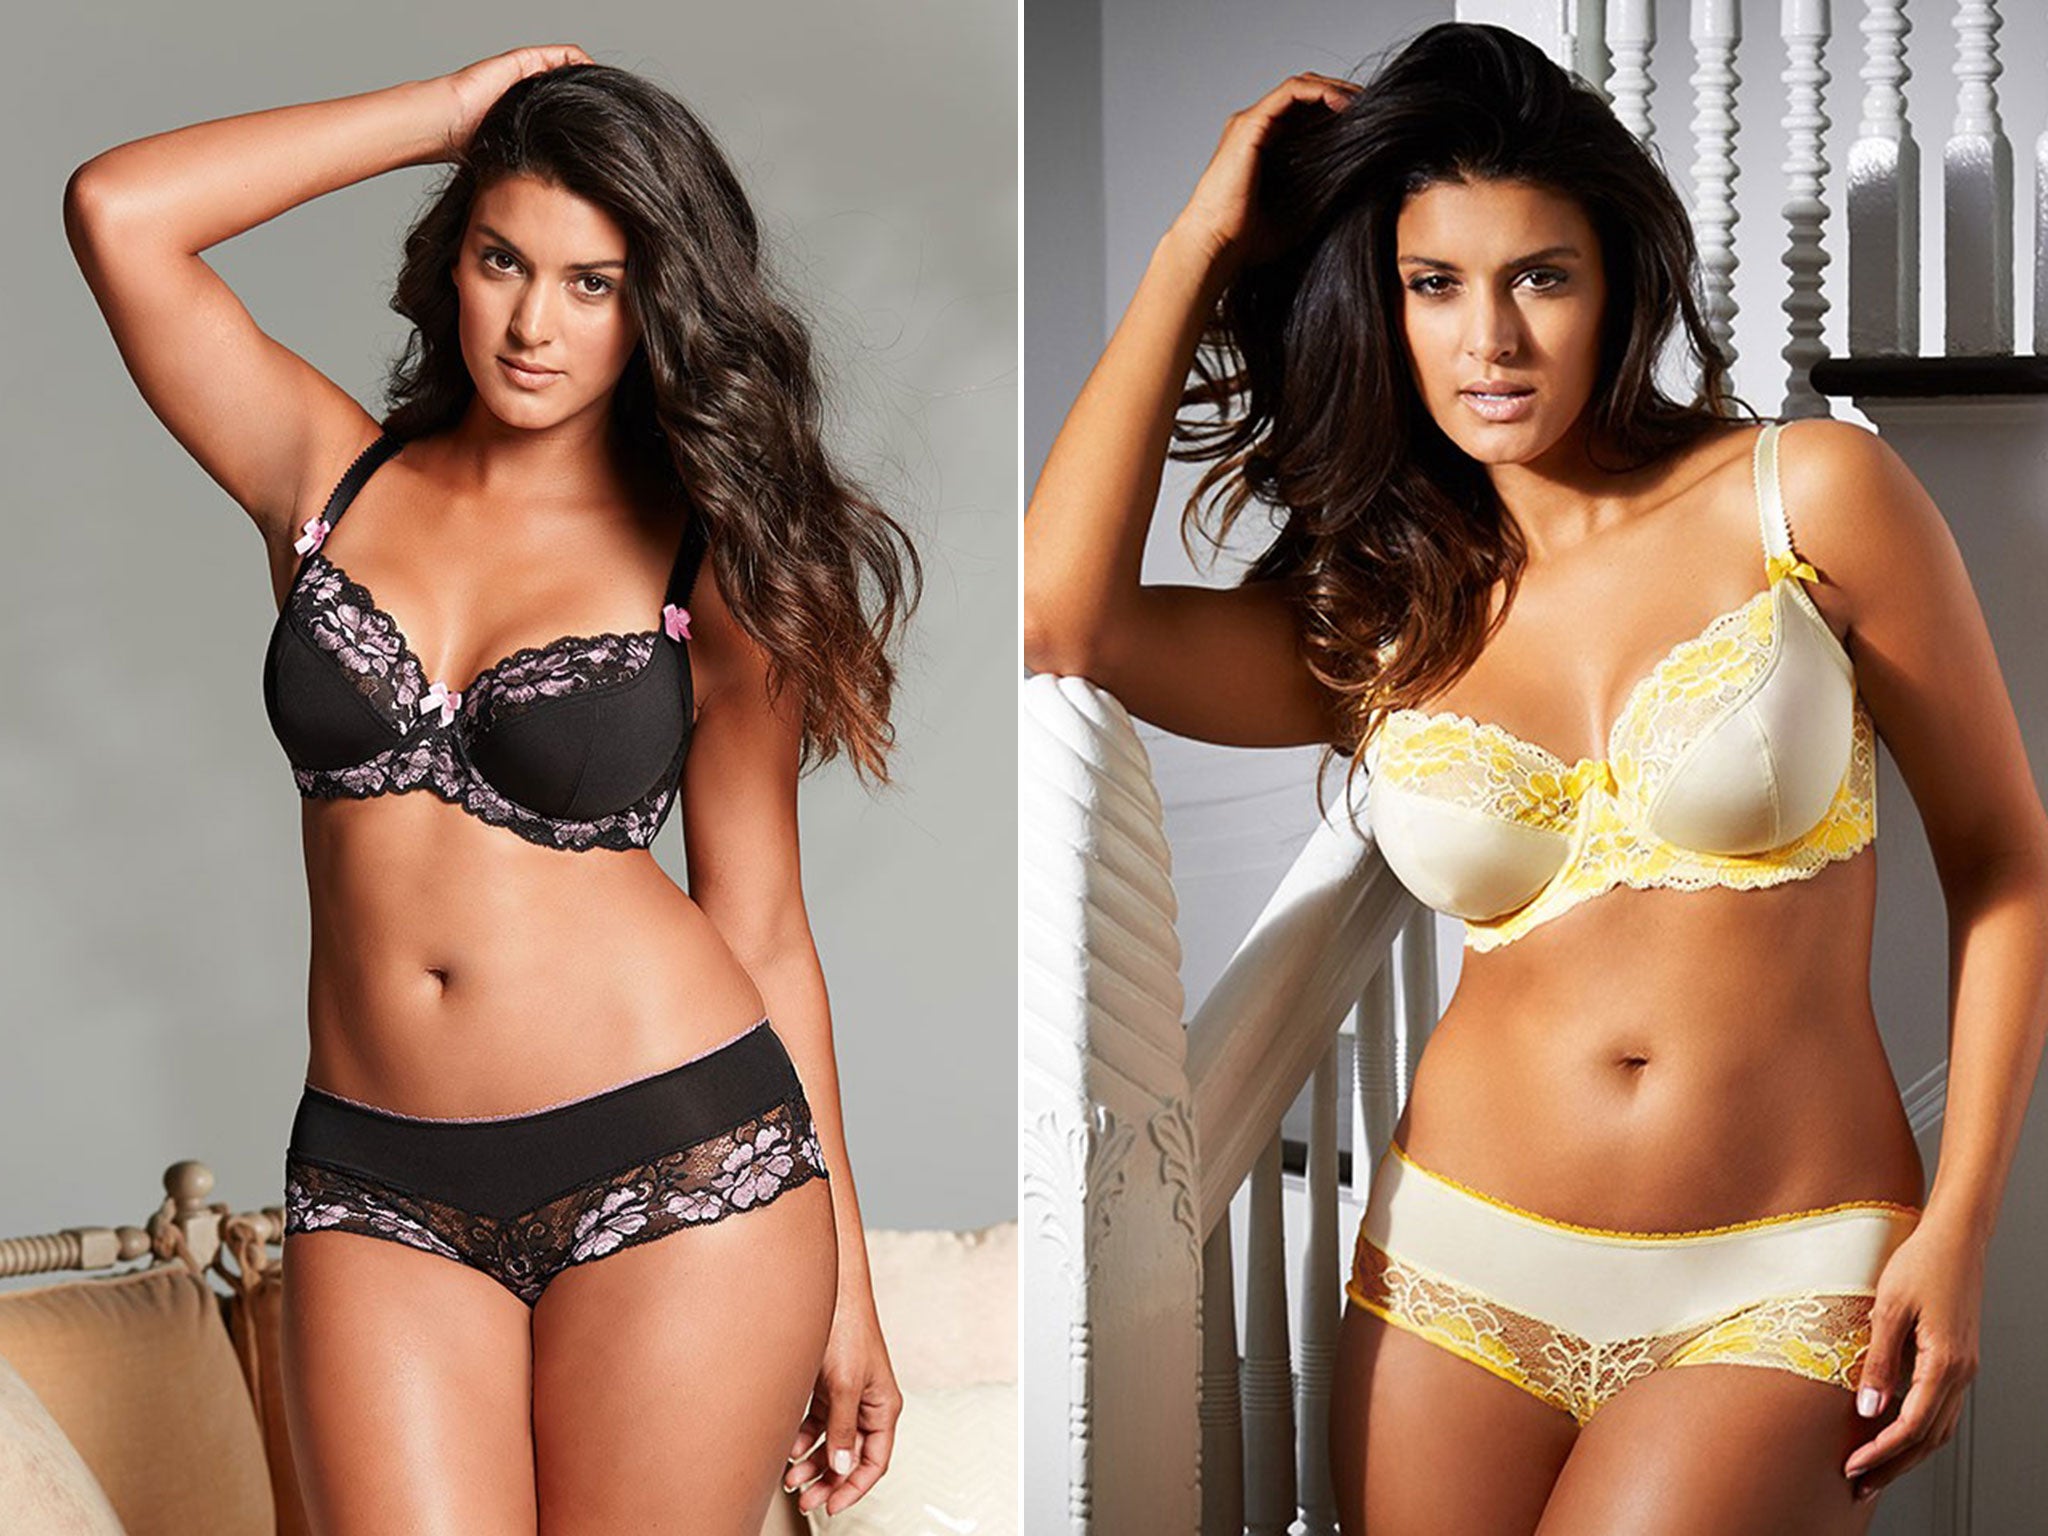 gewoon Dapper Op de een of andere manier Revealed: Plus-size models sell more lingerie than slim models – and  brunettes sell more than blondes | The Independent | The Independent